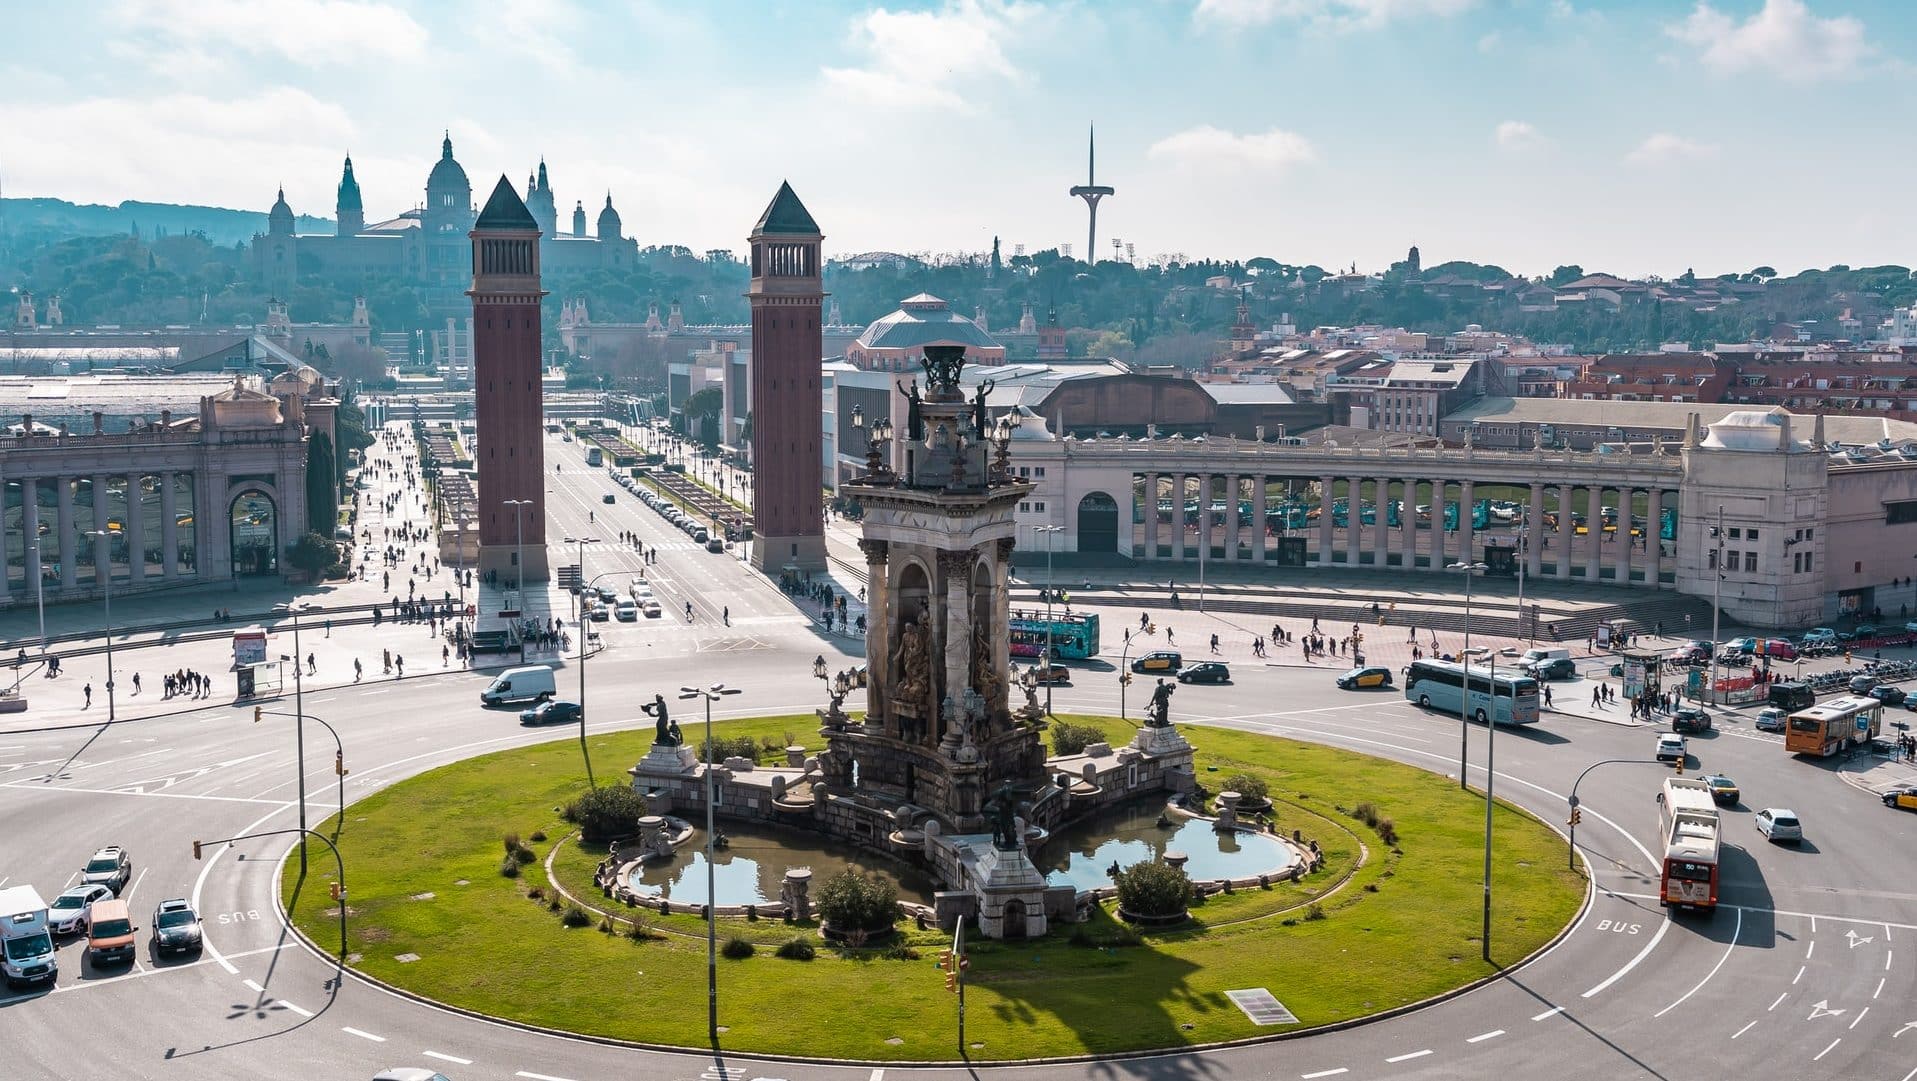 Plaça d'Espanya offers one of the most striking images of Barcelona